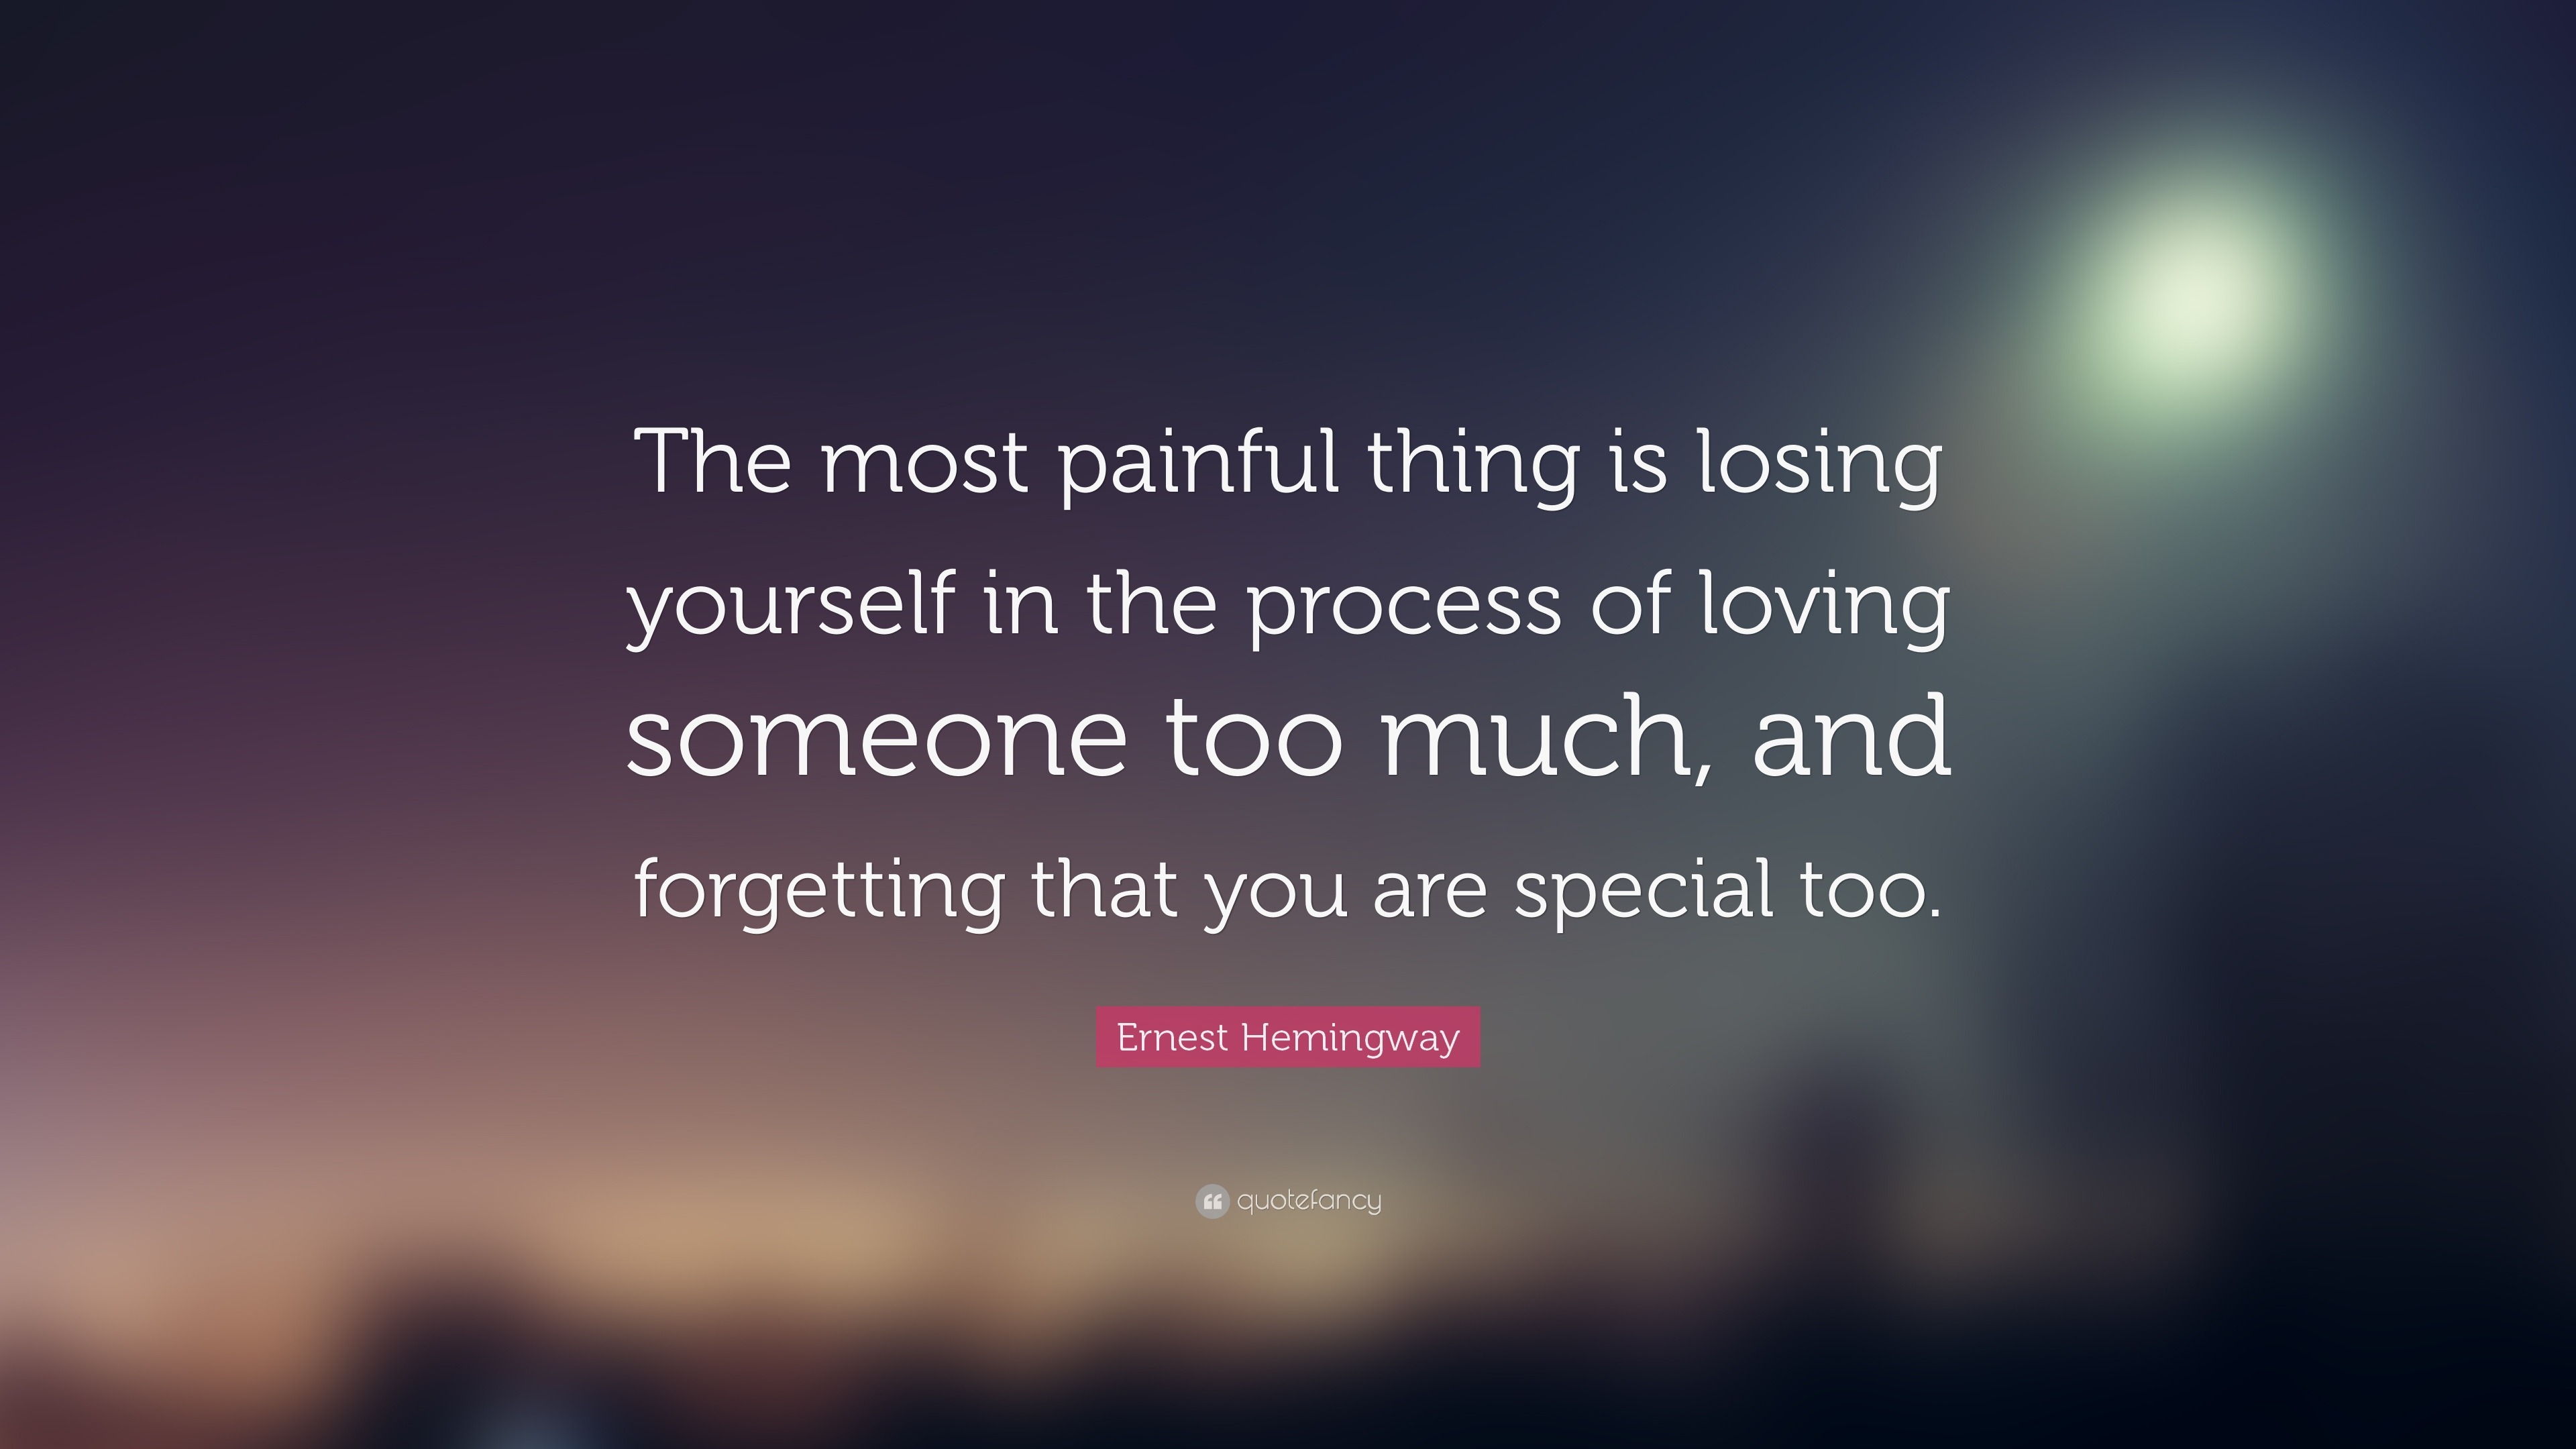 Ernest Hemingway Quote The most painful thing is losing yourself in 